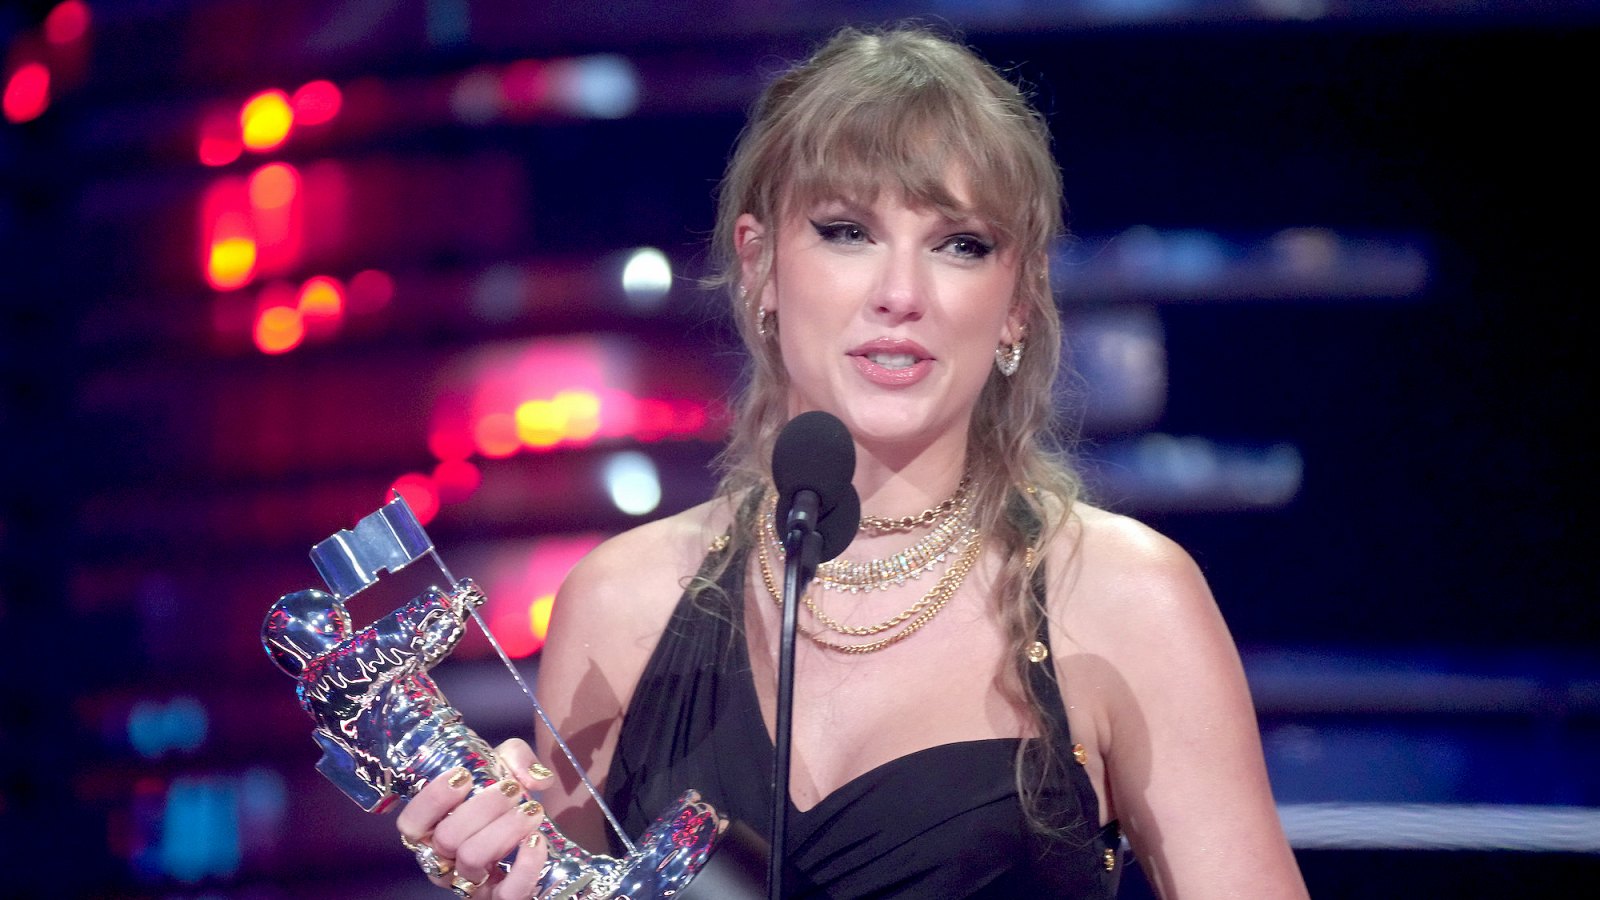 Taylor Swift Wins Song of the Year at the MTV Video Music Awards